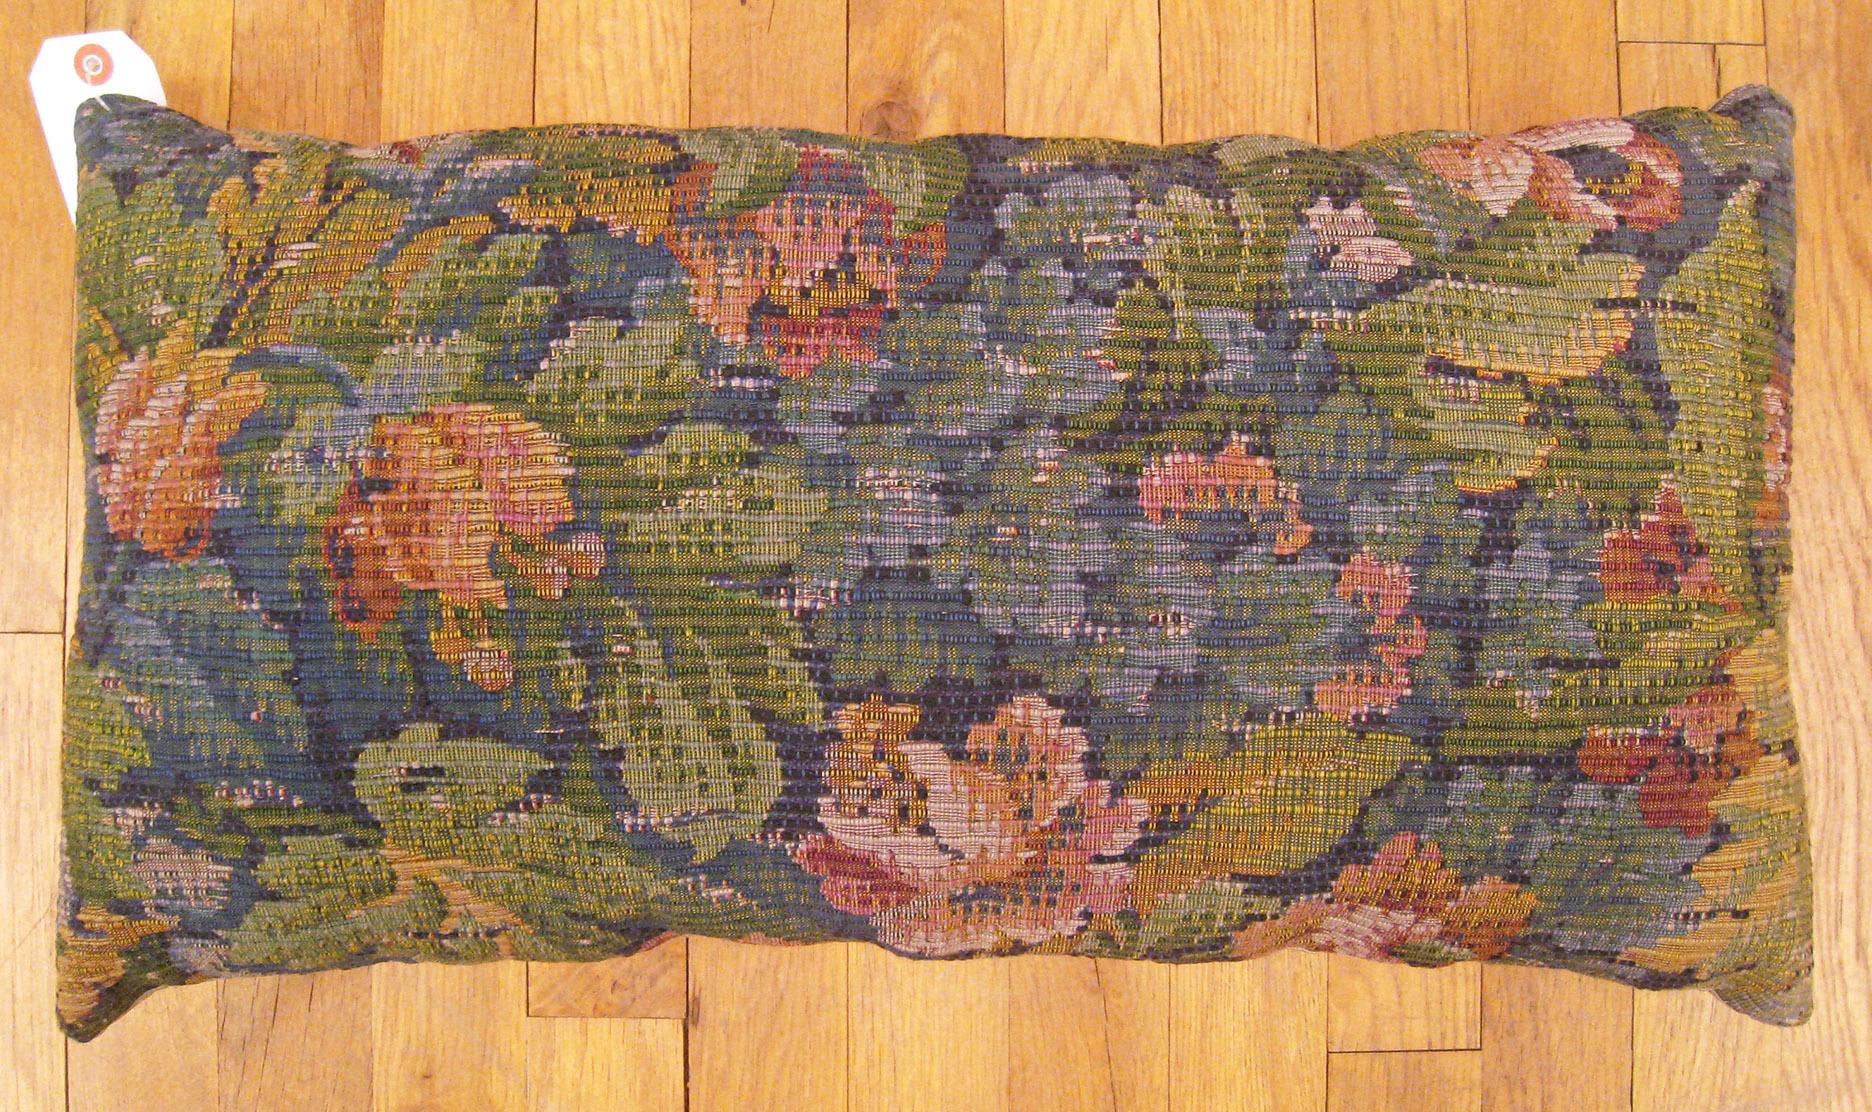 Antique Jacquard Tapestry Pillow; size 1'0” x 2'0”.

An antique decorative pillow with floral elements allover a blue green central field, size 1'0